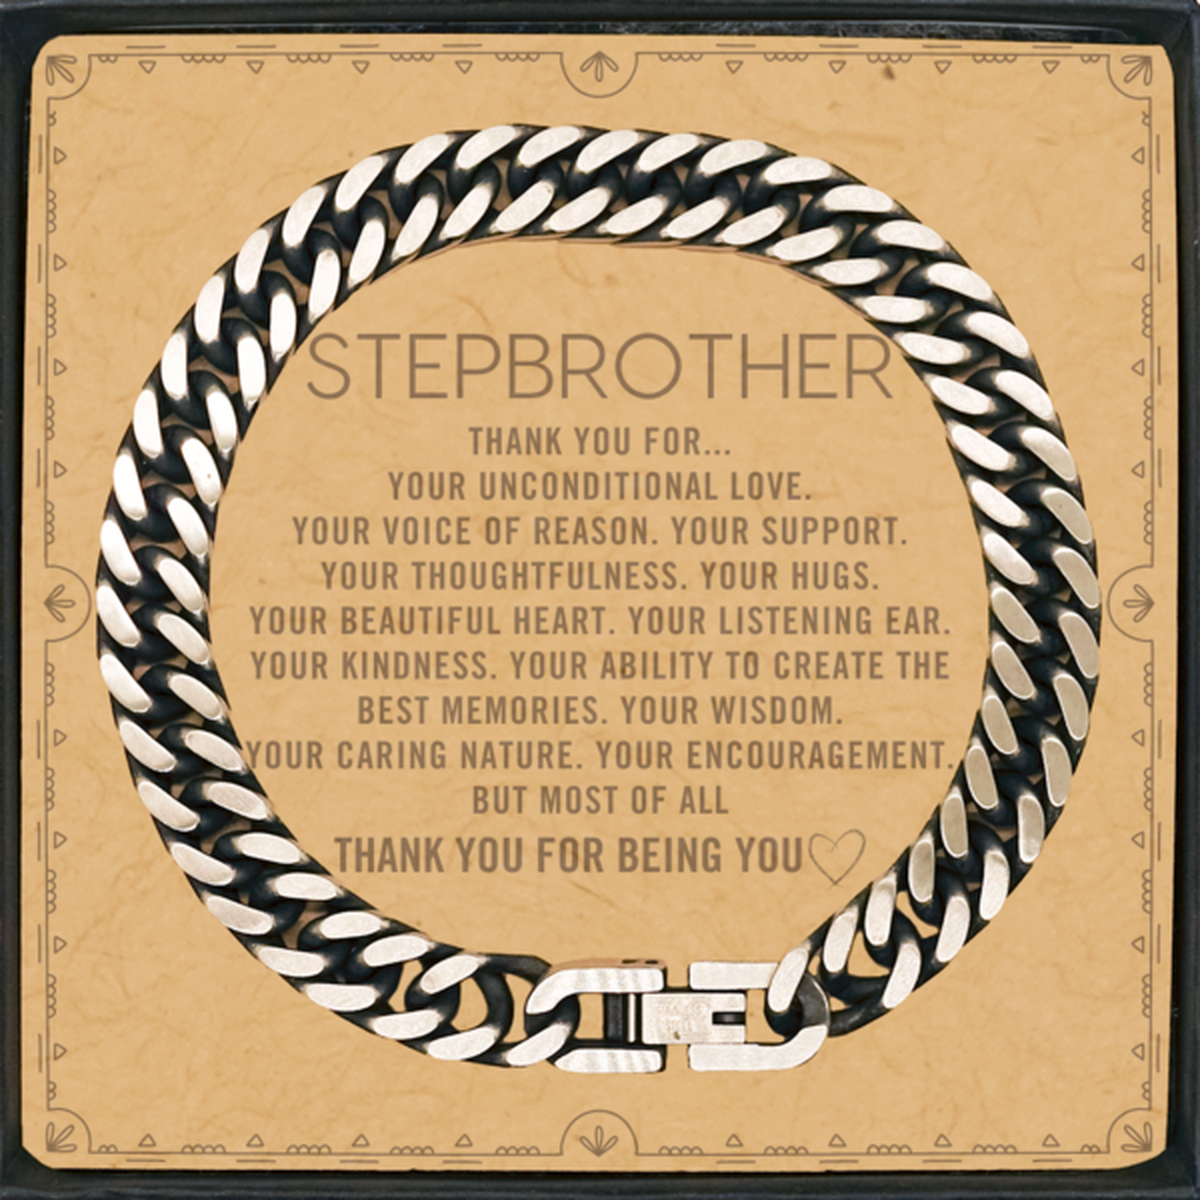 Stepbrother Cuban Link Chain Bracelet Custom, Message Card Gifts For Stepbrother Christmas Graduation Birthday Gifts for Men Women Stepbrother Thank you for Your unconditional love